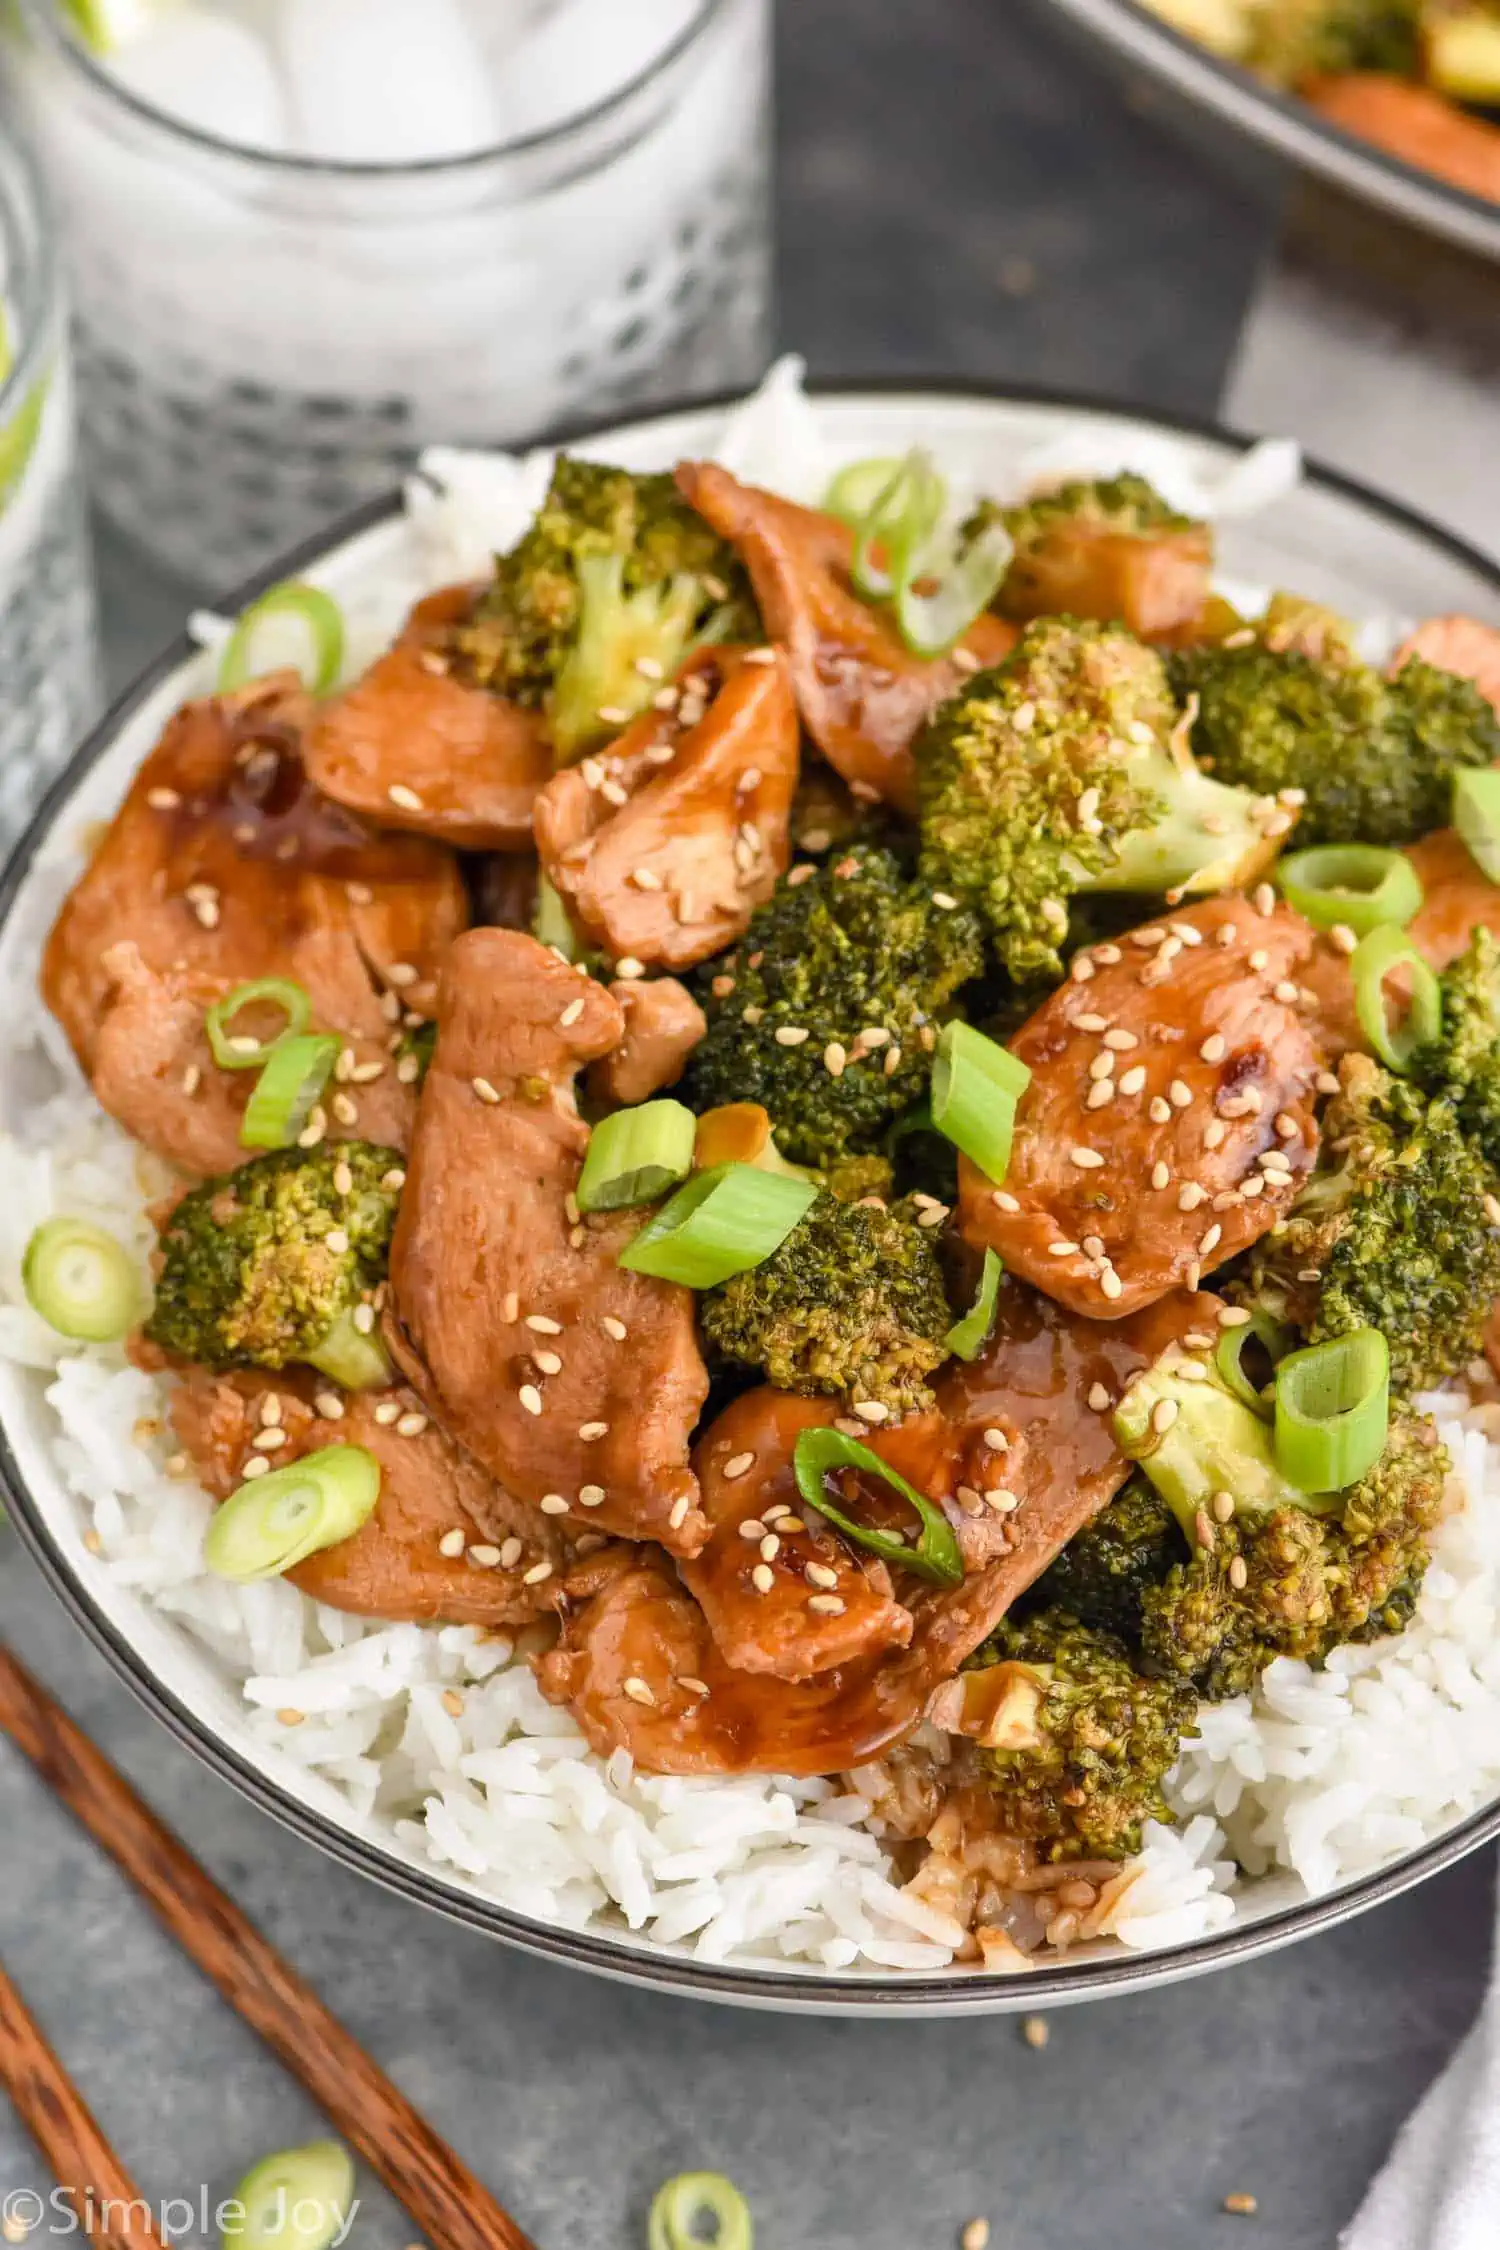 Plate of Chicken and Broccoli Recipe served on rice. Drinks beside plate.